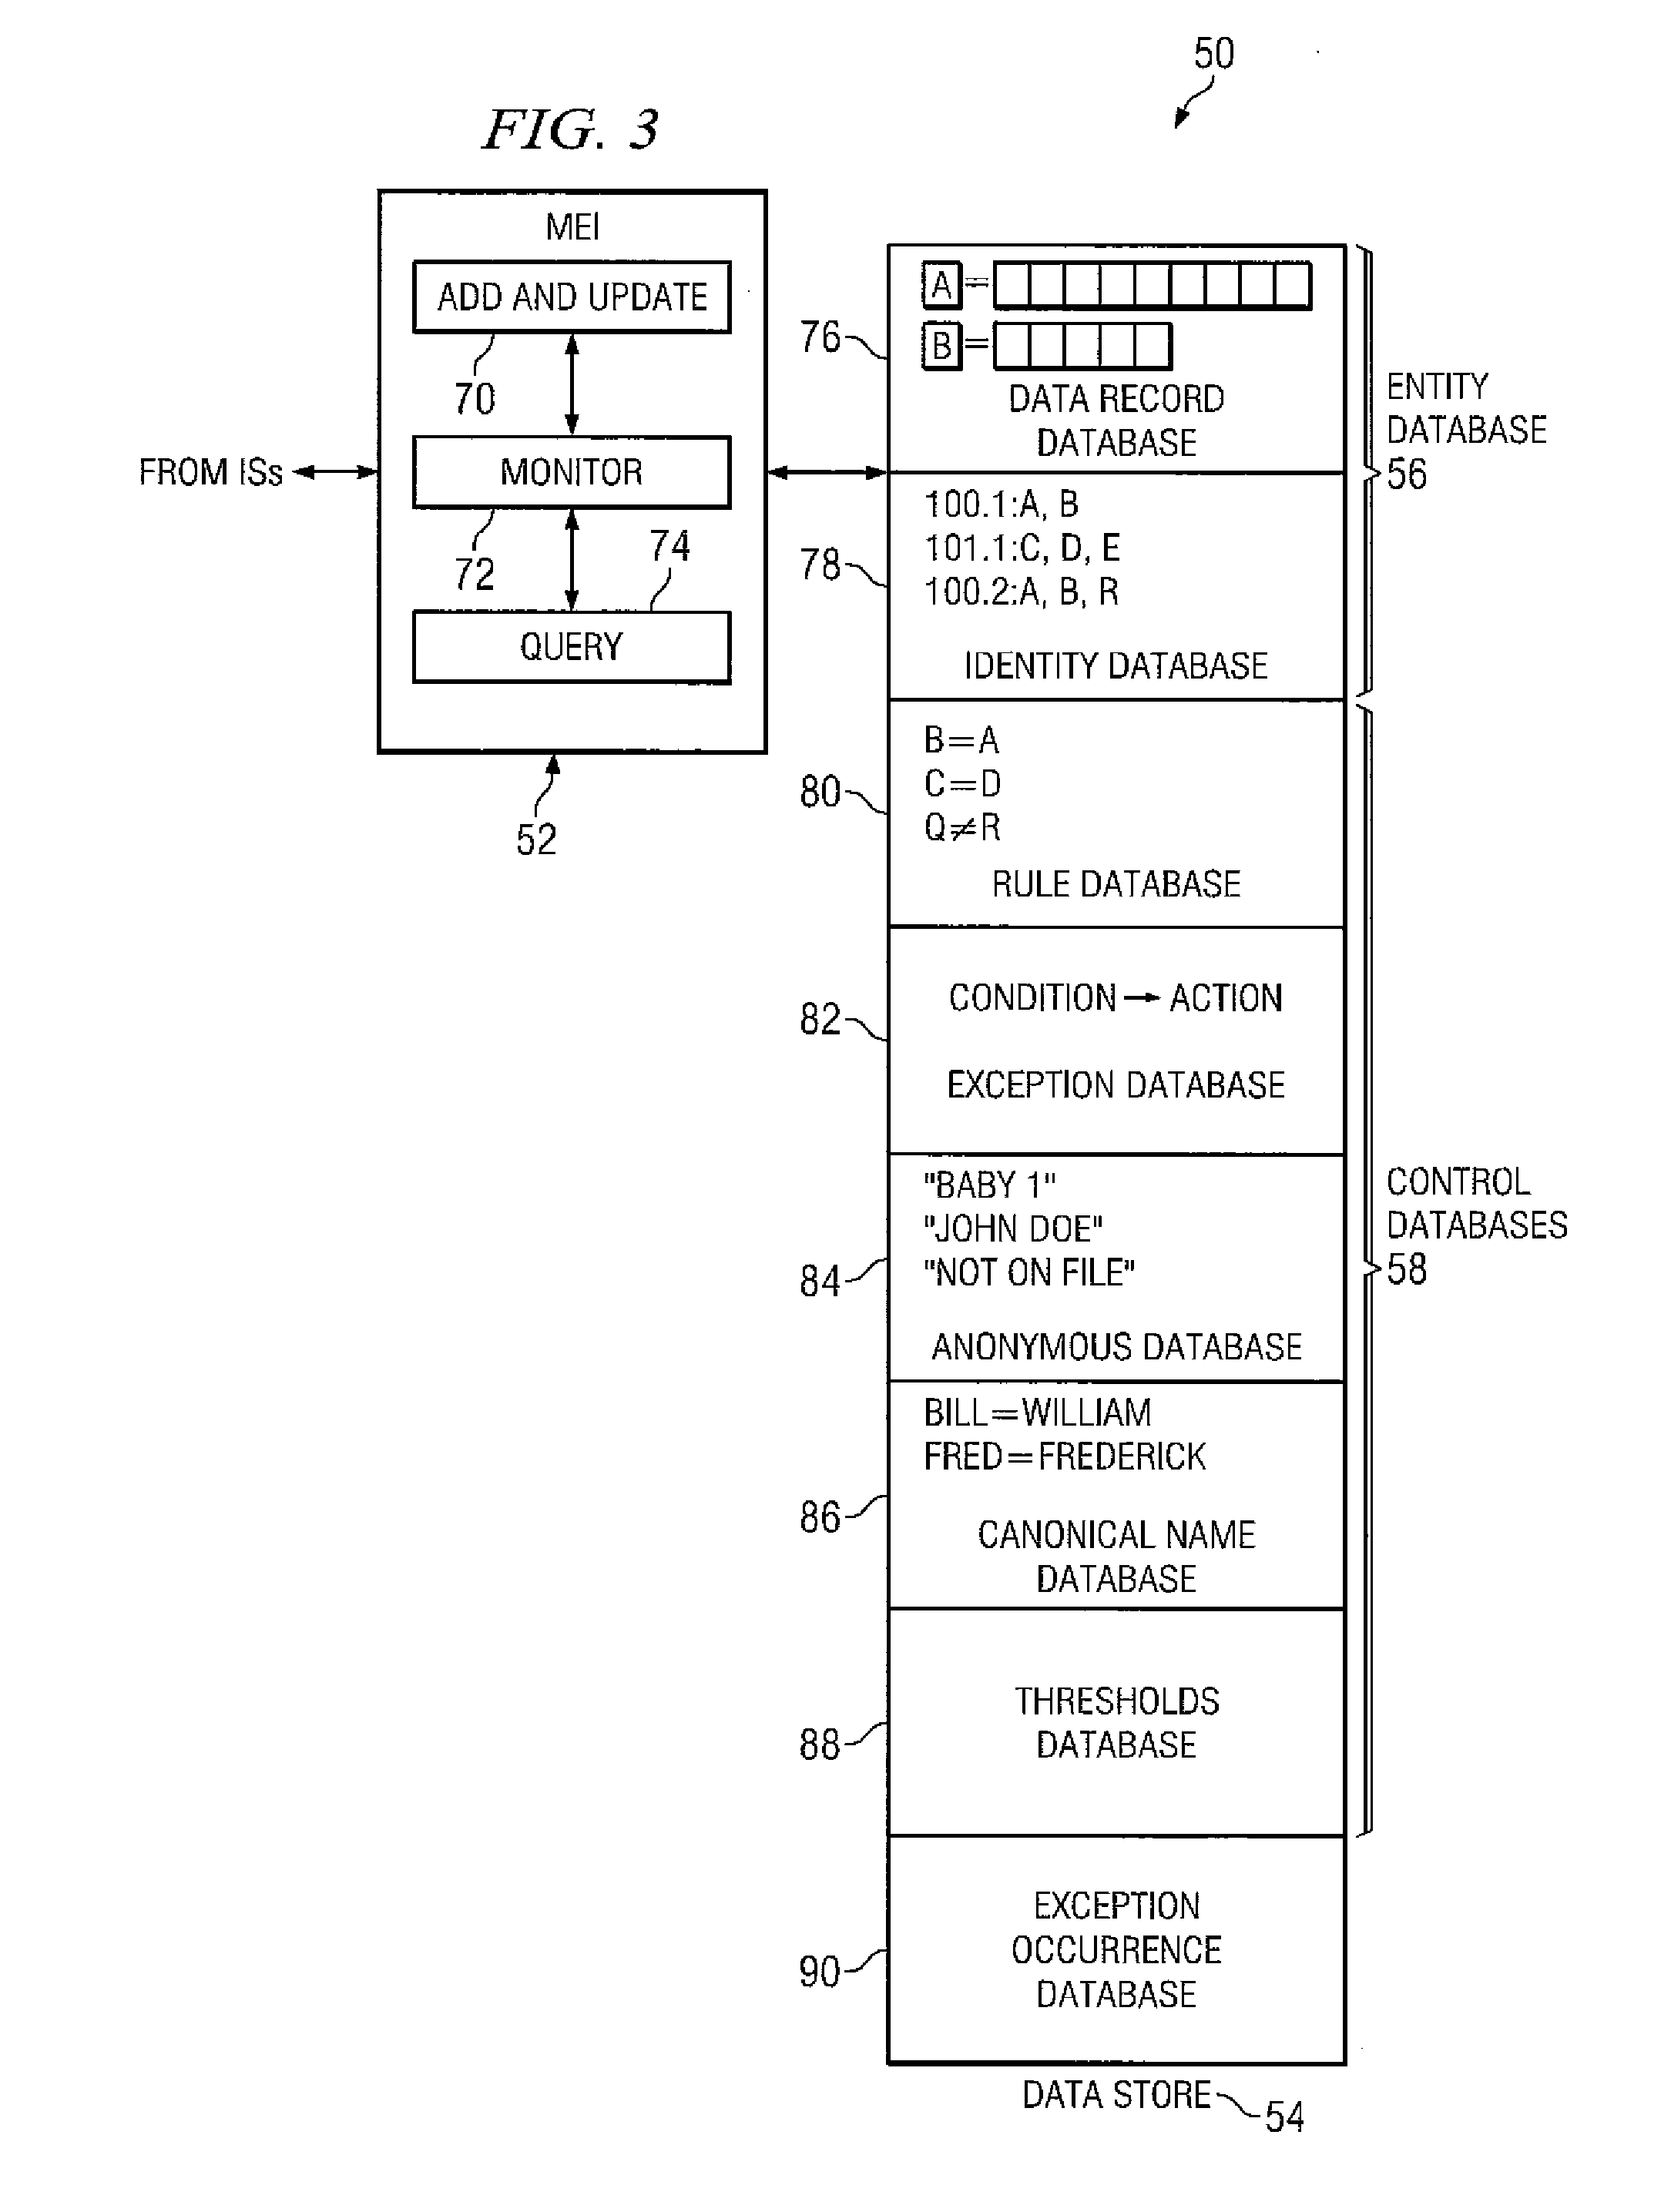 Method and System for Managing Entities